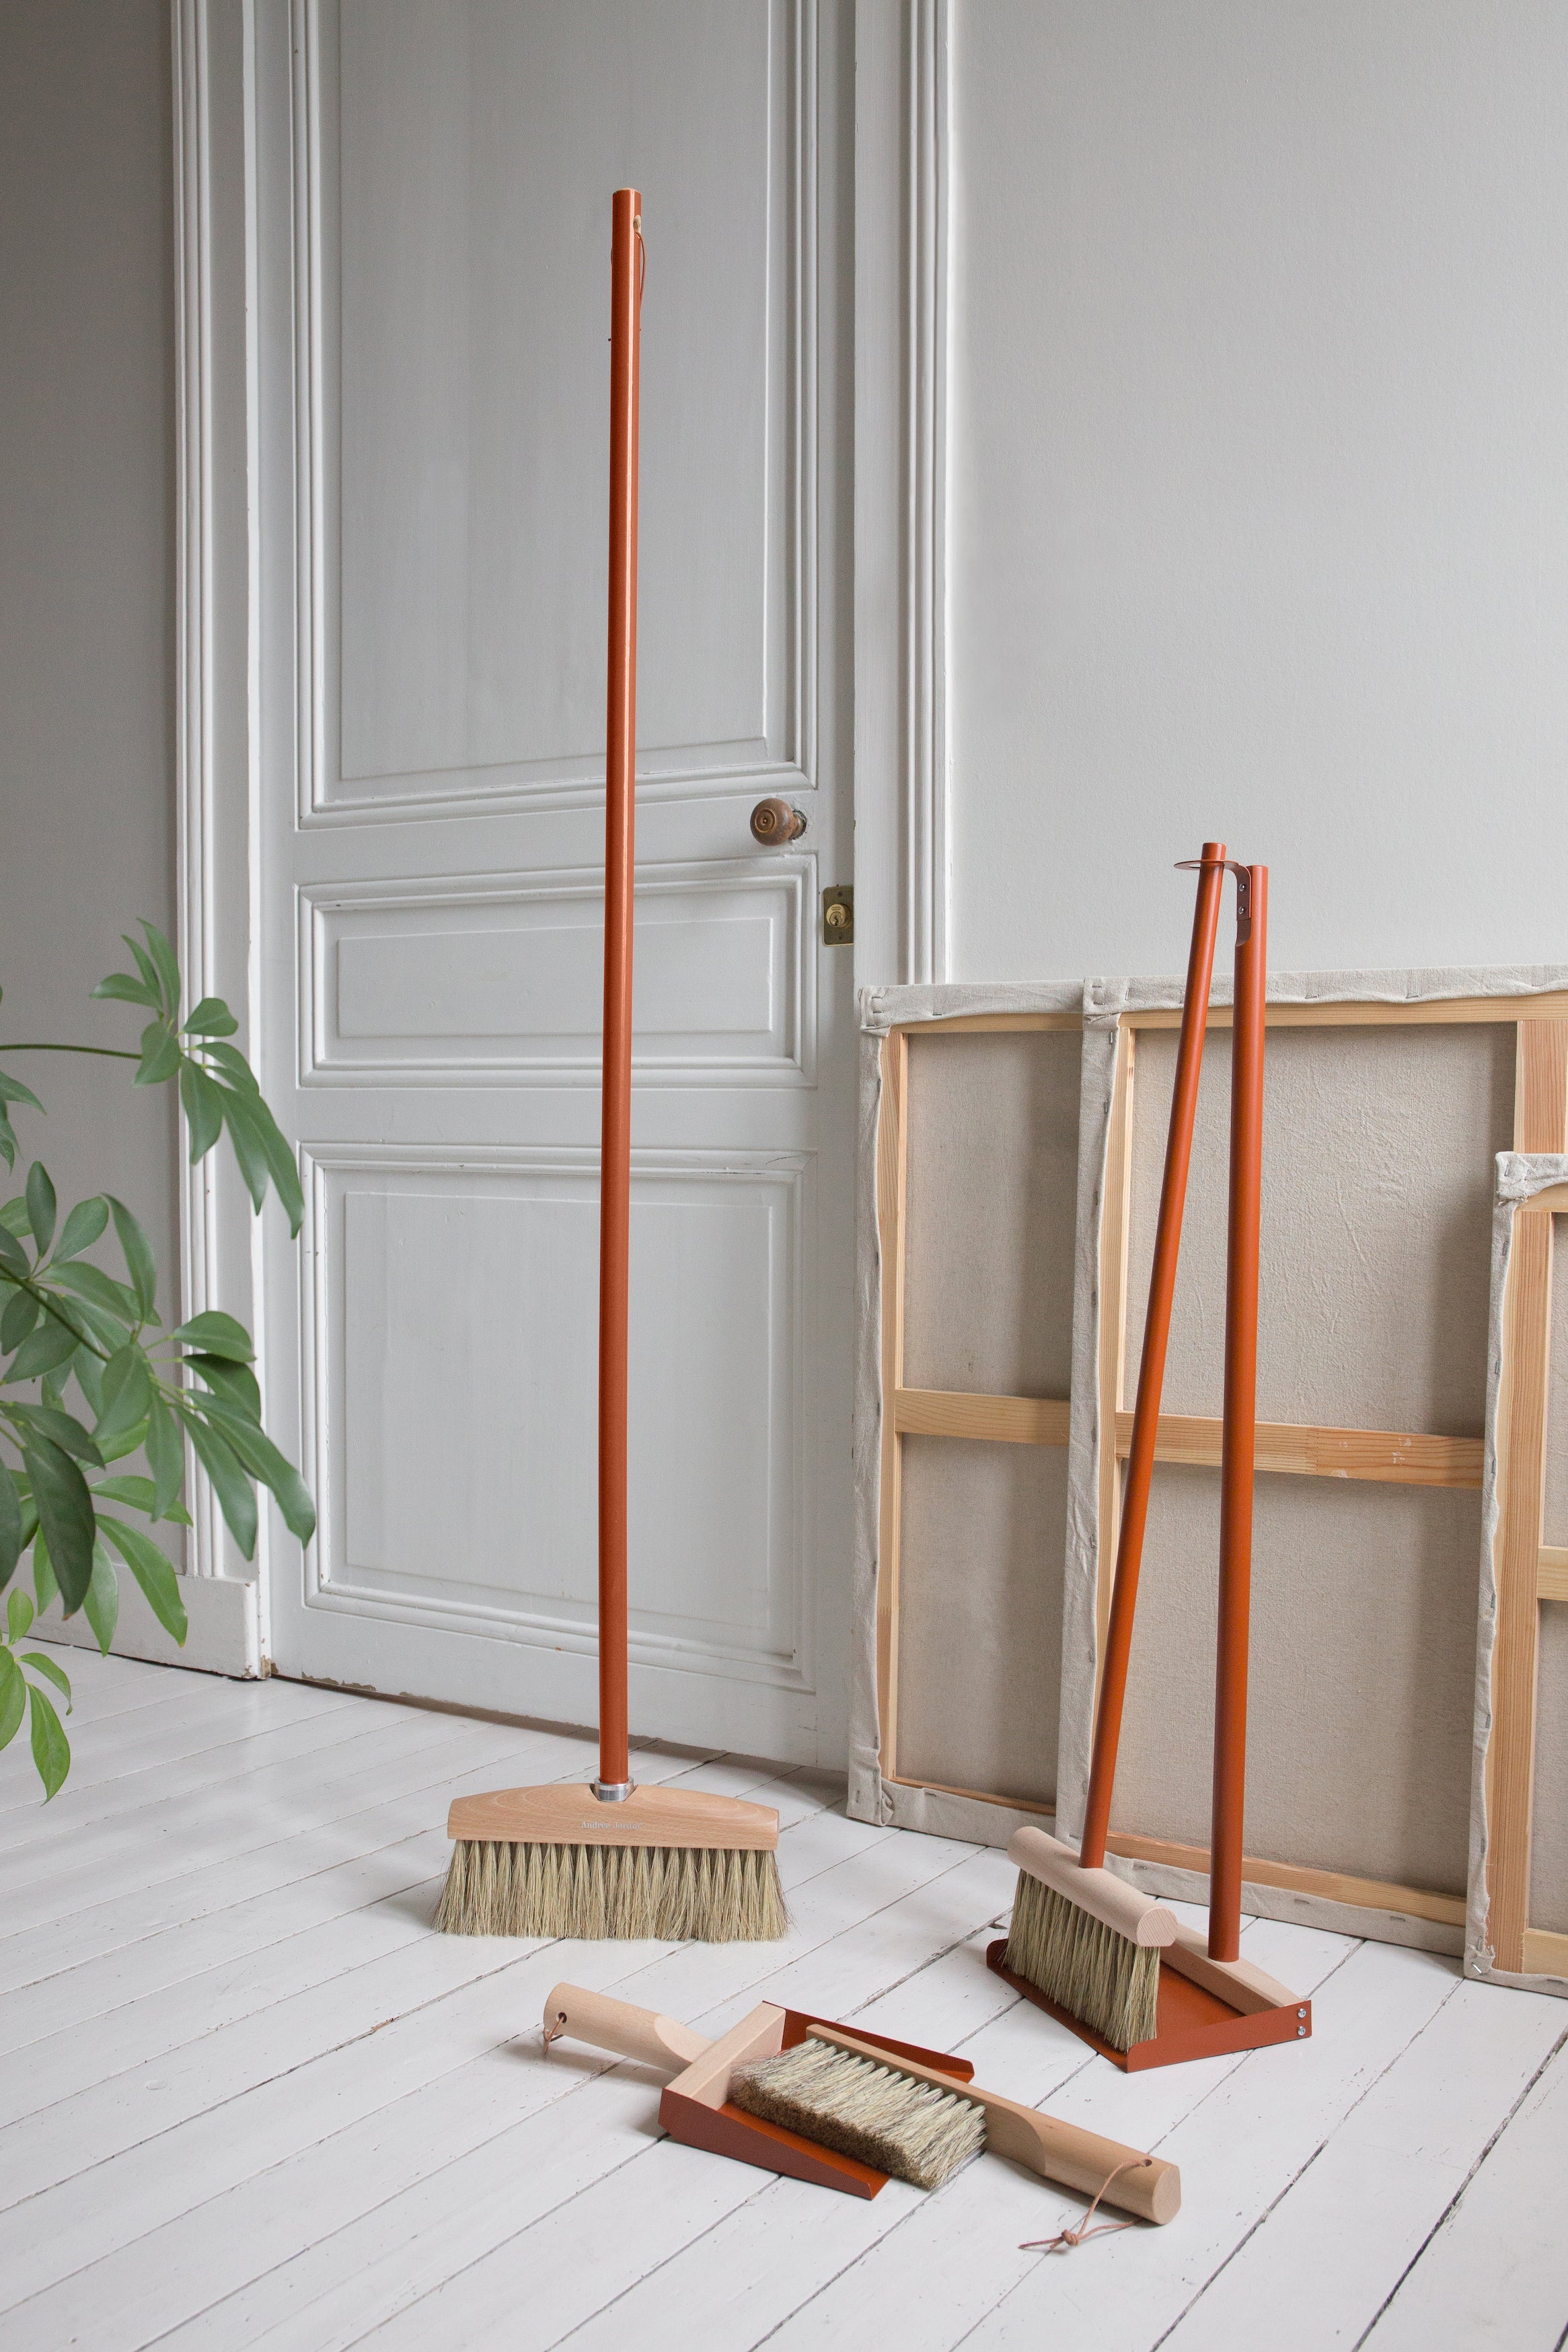 Andrée Jardin Mr. and Mrs. Clynk Natural Large Complet Dustpan and Broom Utilities Andrée Jardin Brand_Andrée Jardin Home_Broom Sets Home_Household Cleaning New Arrivals pelle-balayette-long-manche-clynk-3142-4AndreeJardinMr.andMrs.ClynkNaturalLargeCompletDustpanandBroominBrickRed_3ebe5f5c-aaa7-471d-a208-c36da5a71dbb